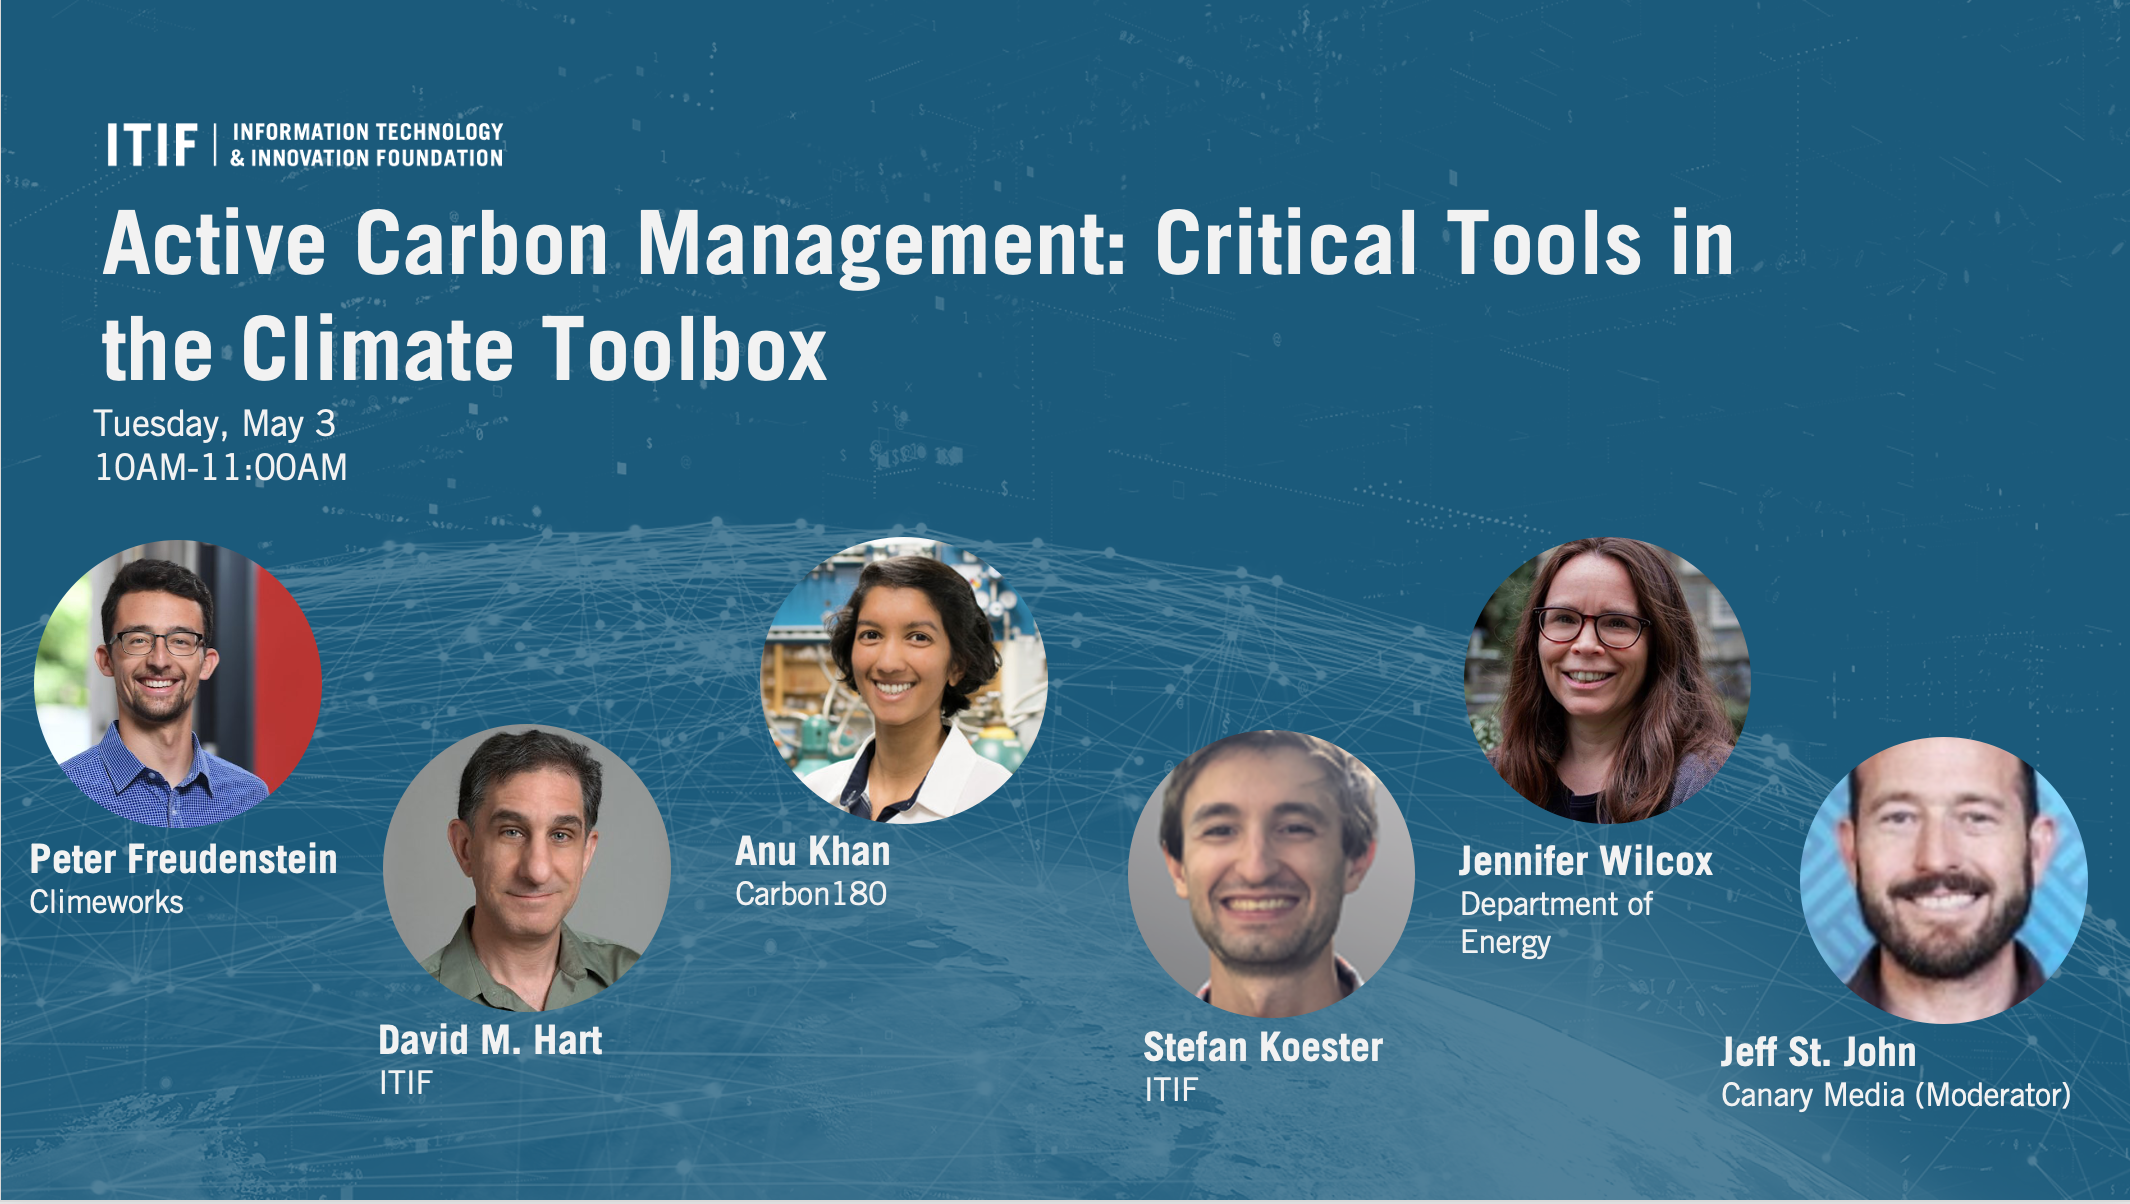 Active Carbon Management: Critical Tools in the Climate Toolbox